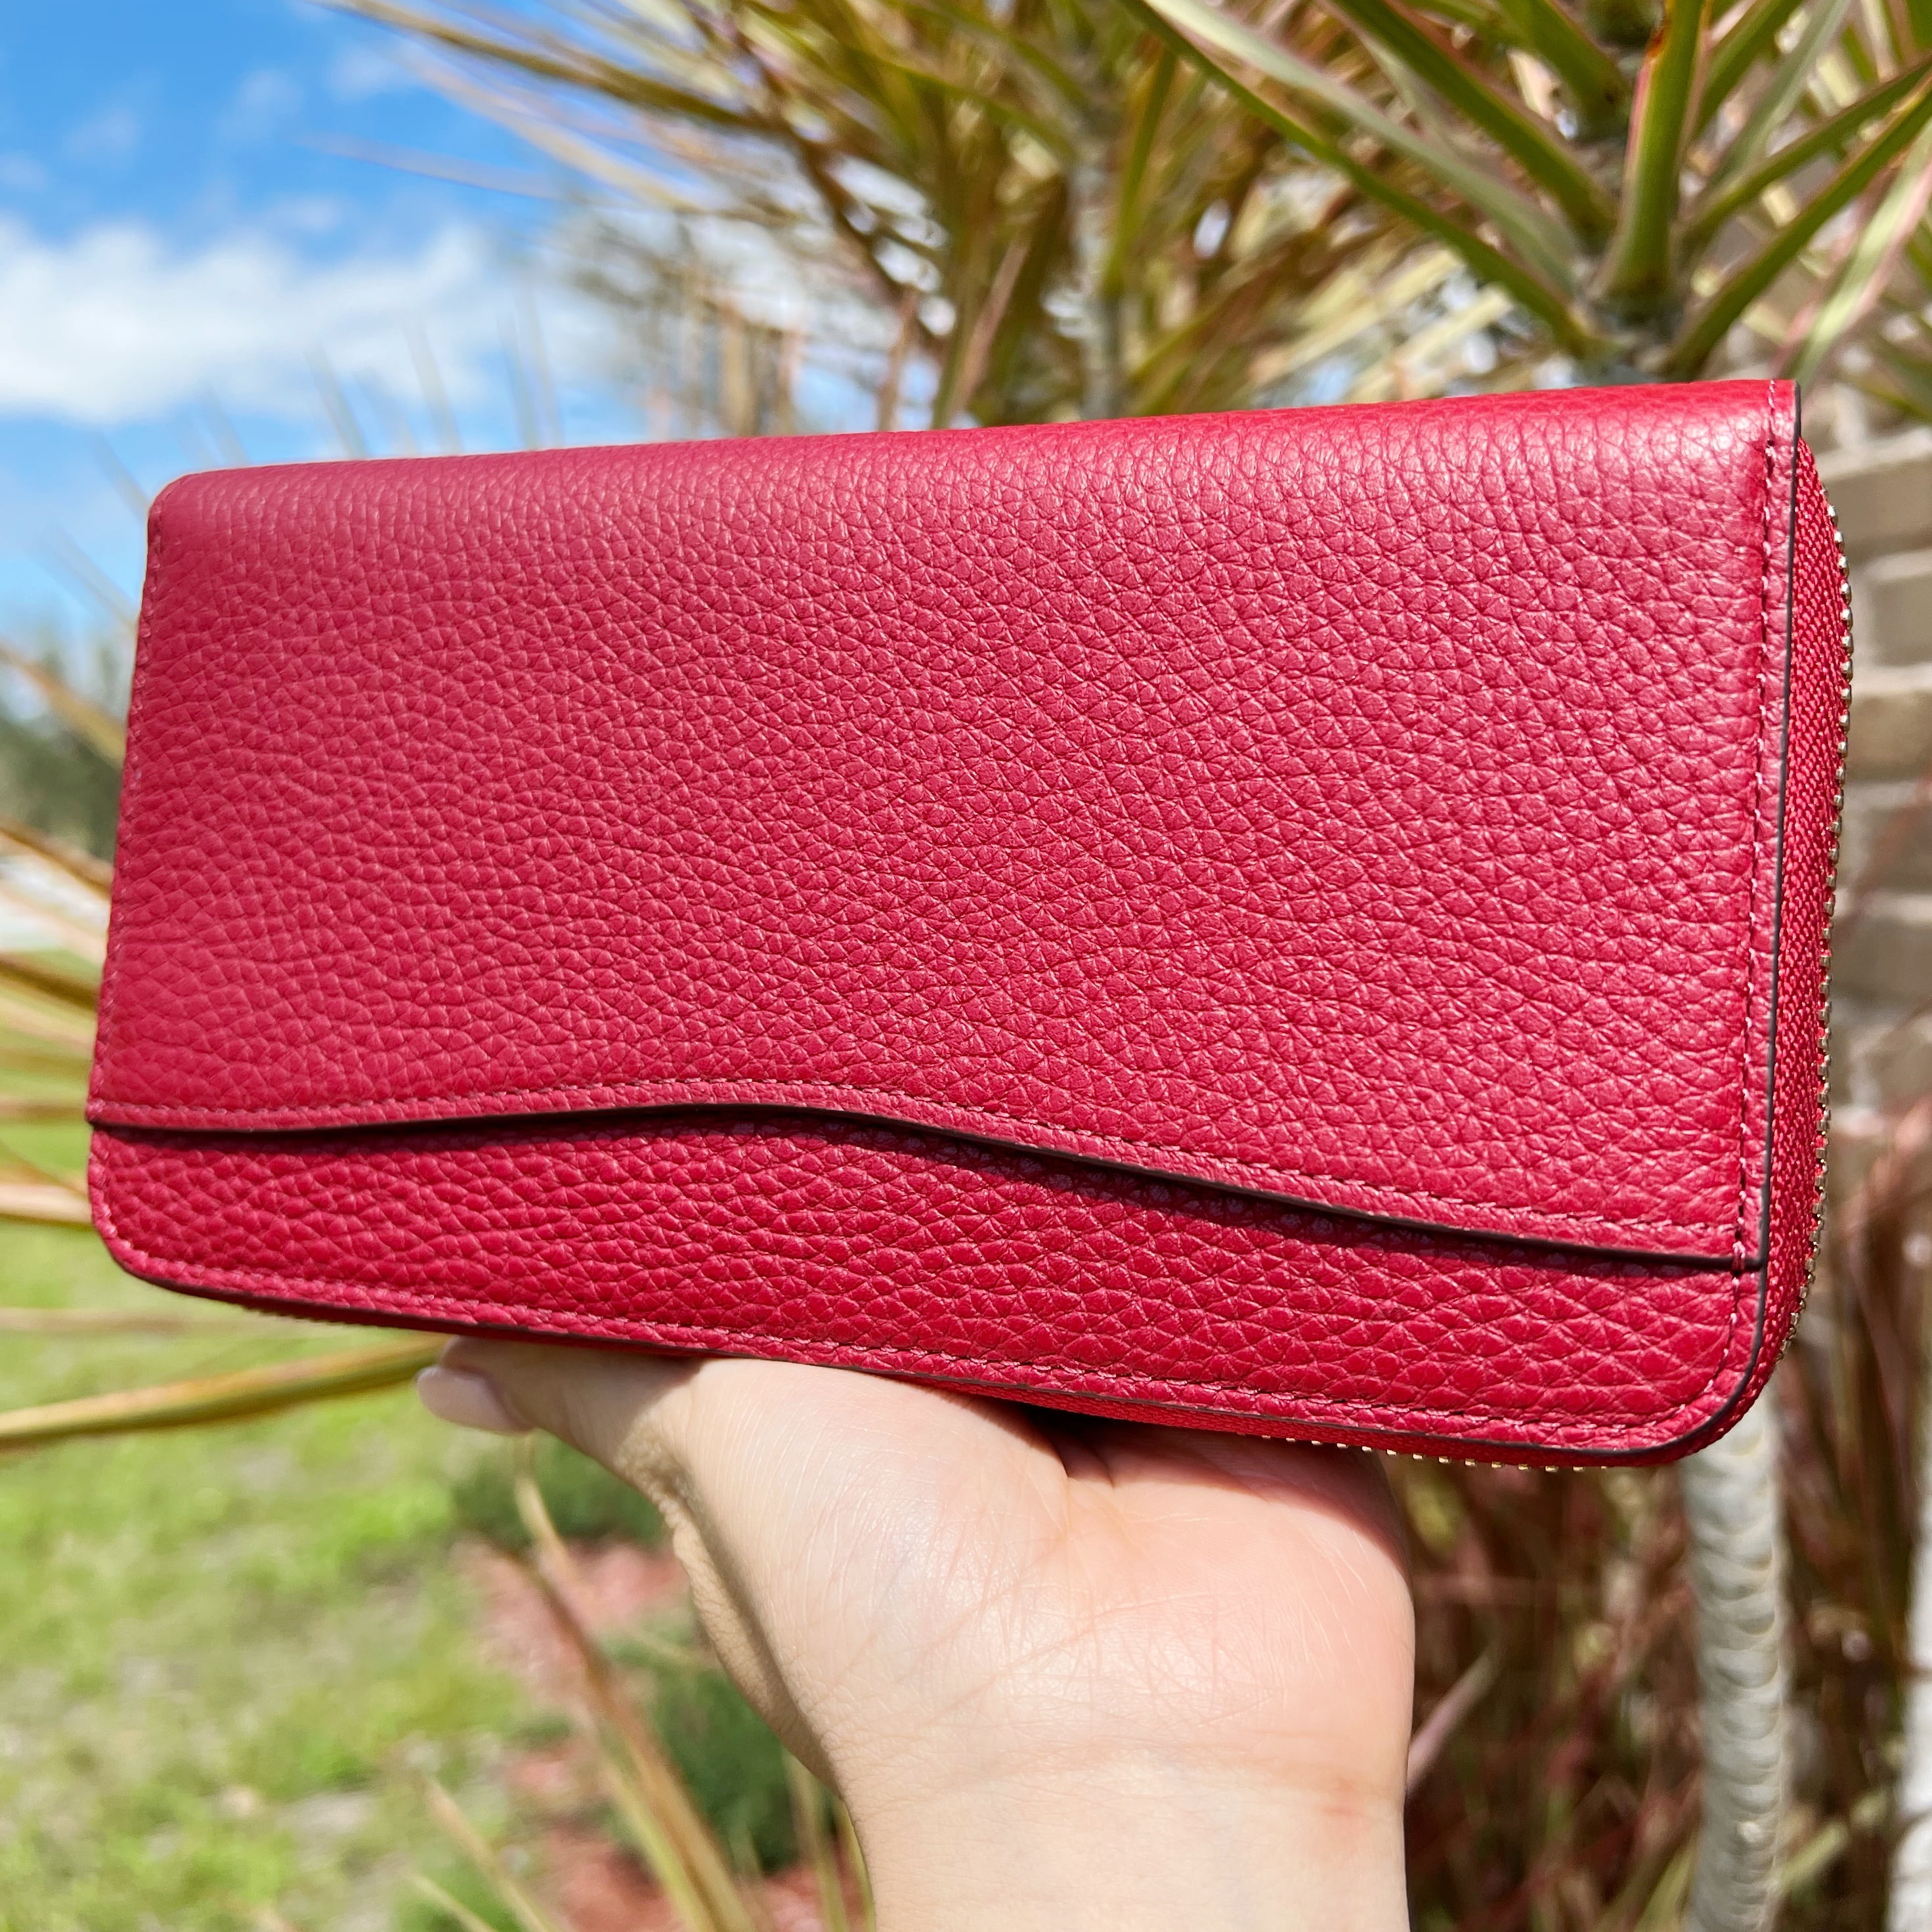 Card Holder - Red leather gusseted card holder